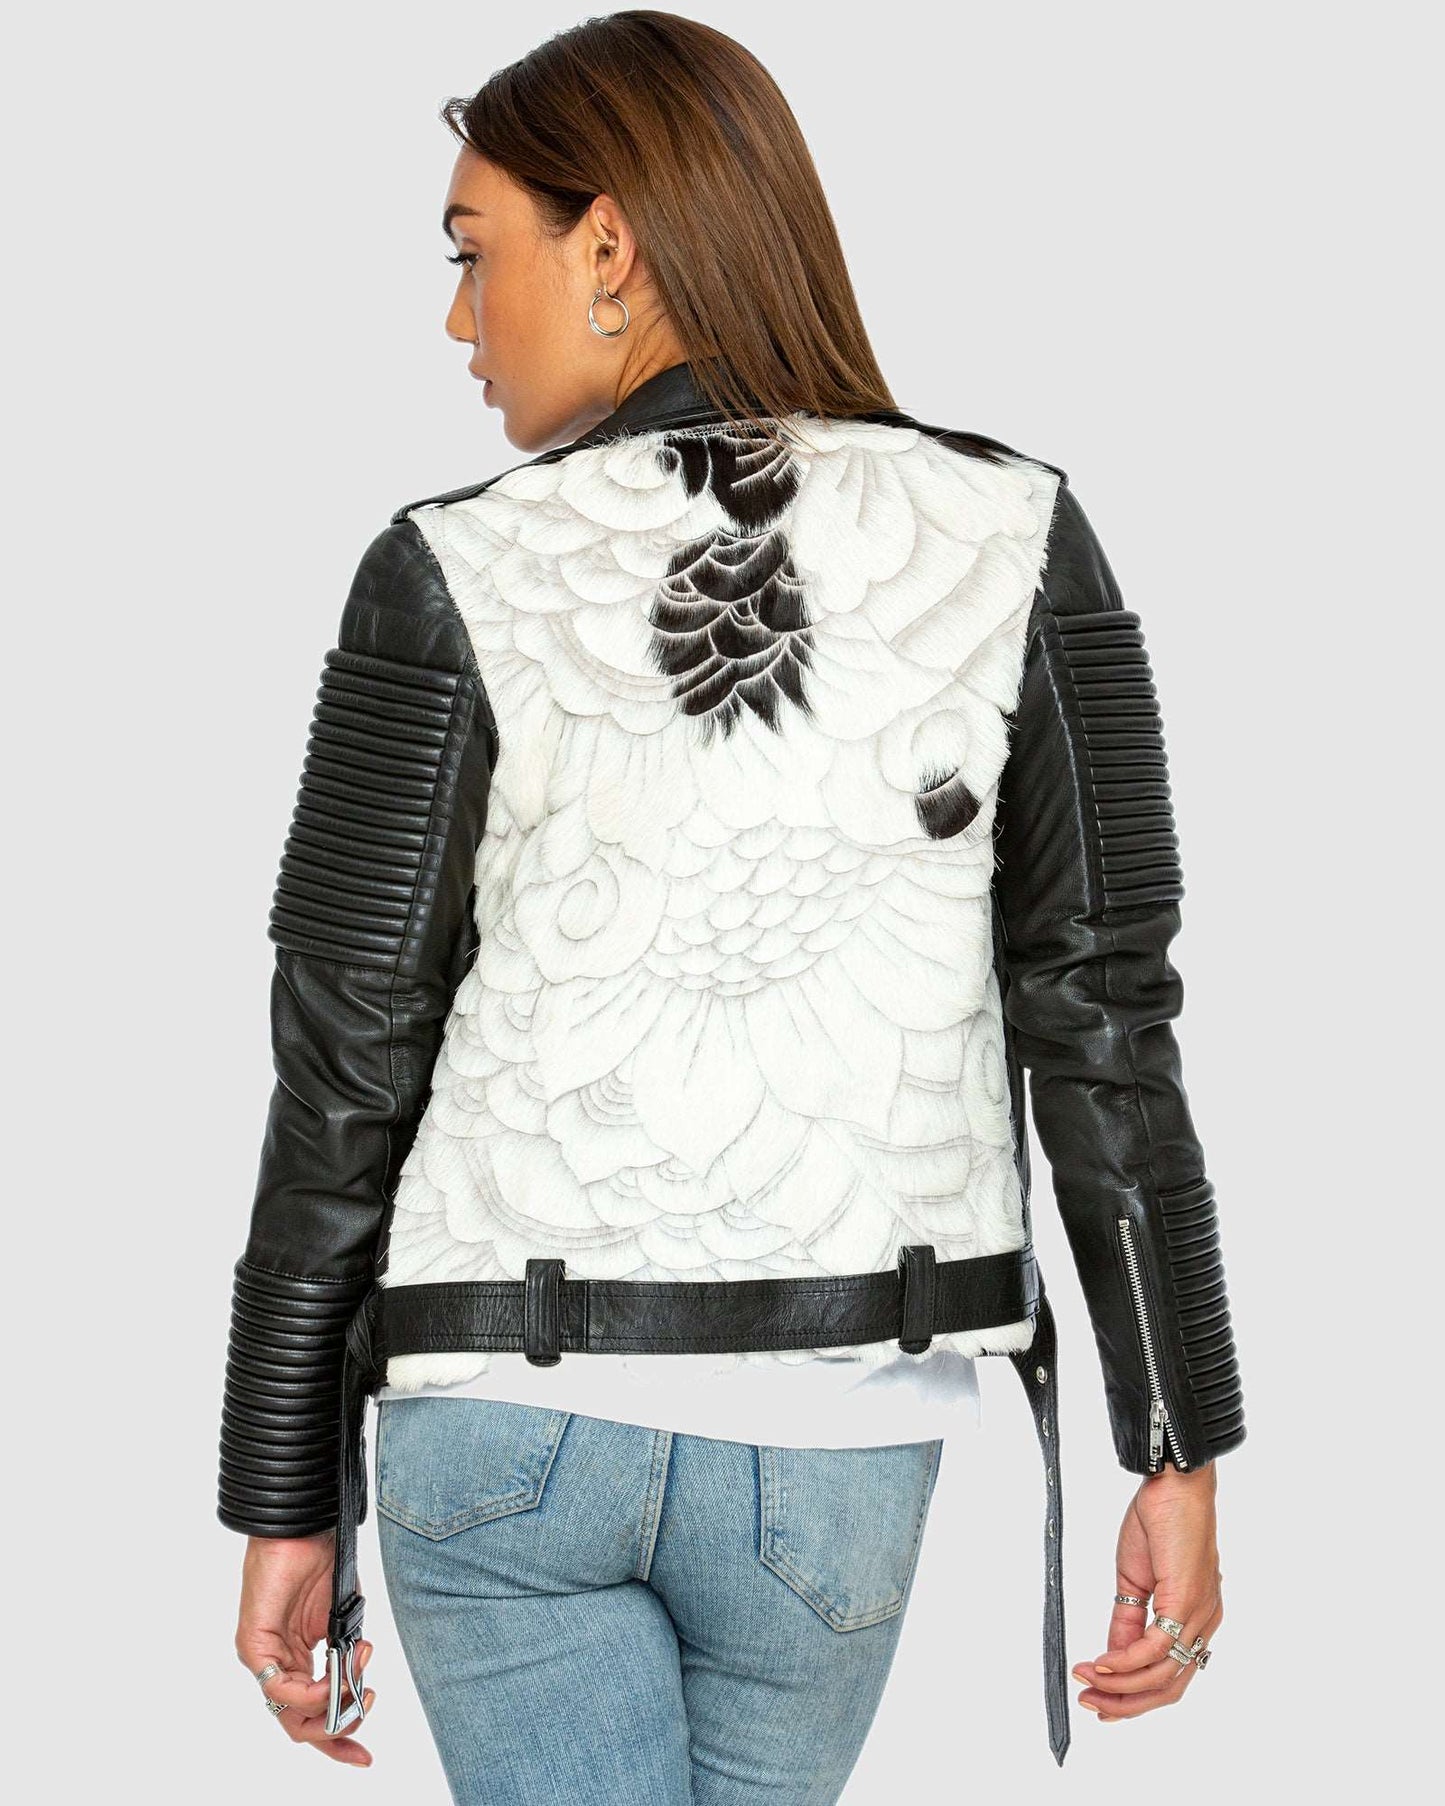 Famous 2Tone Leather Biker - Black and White